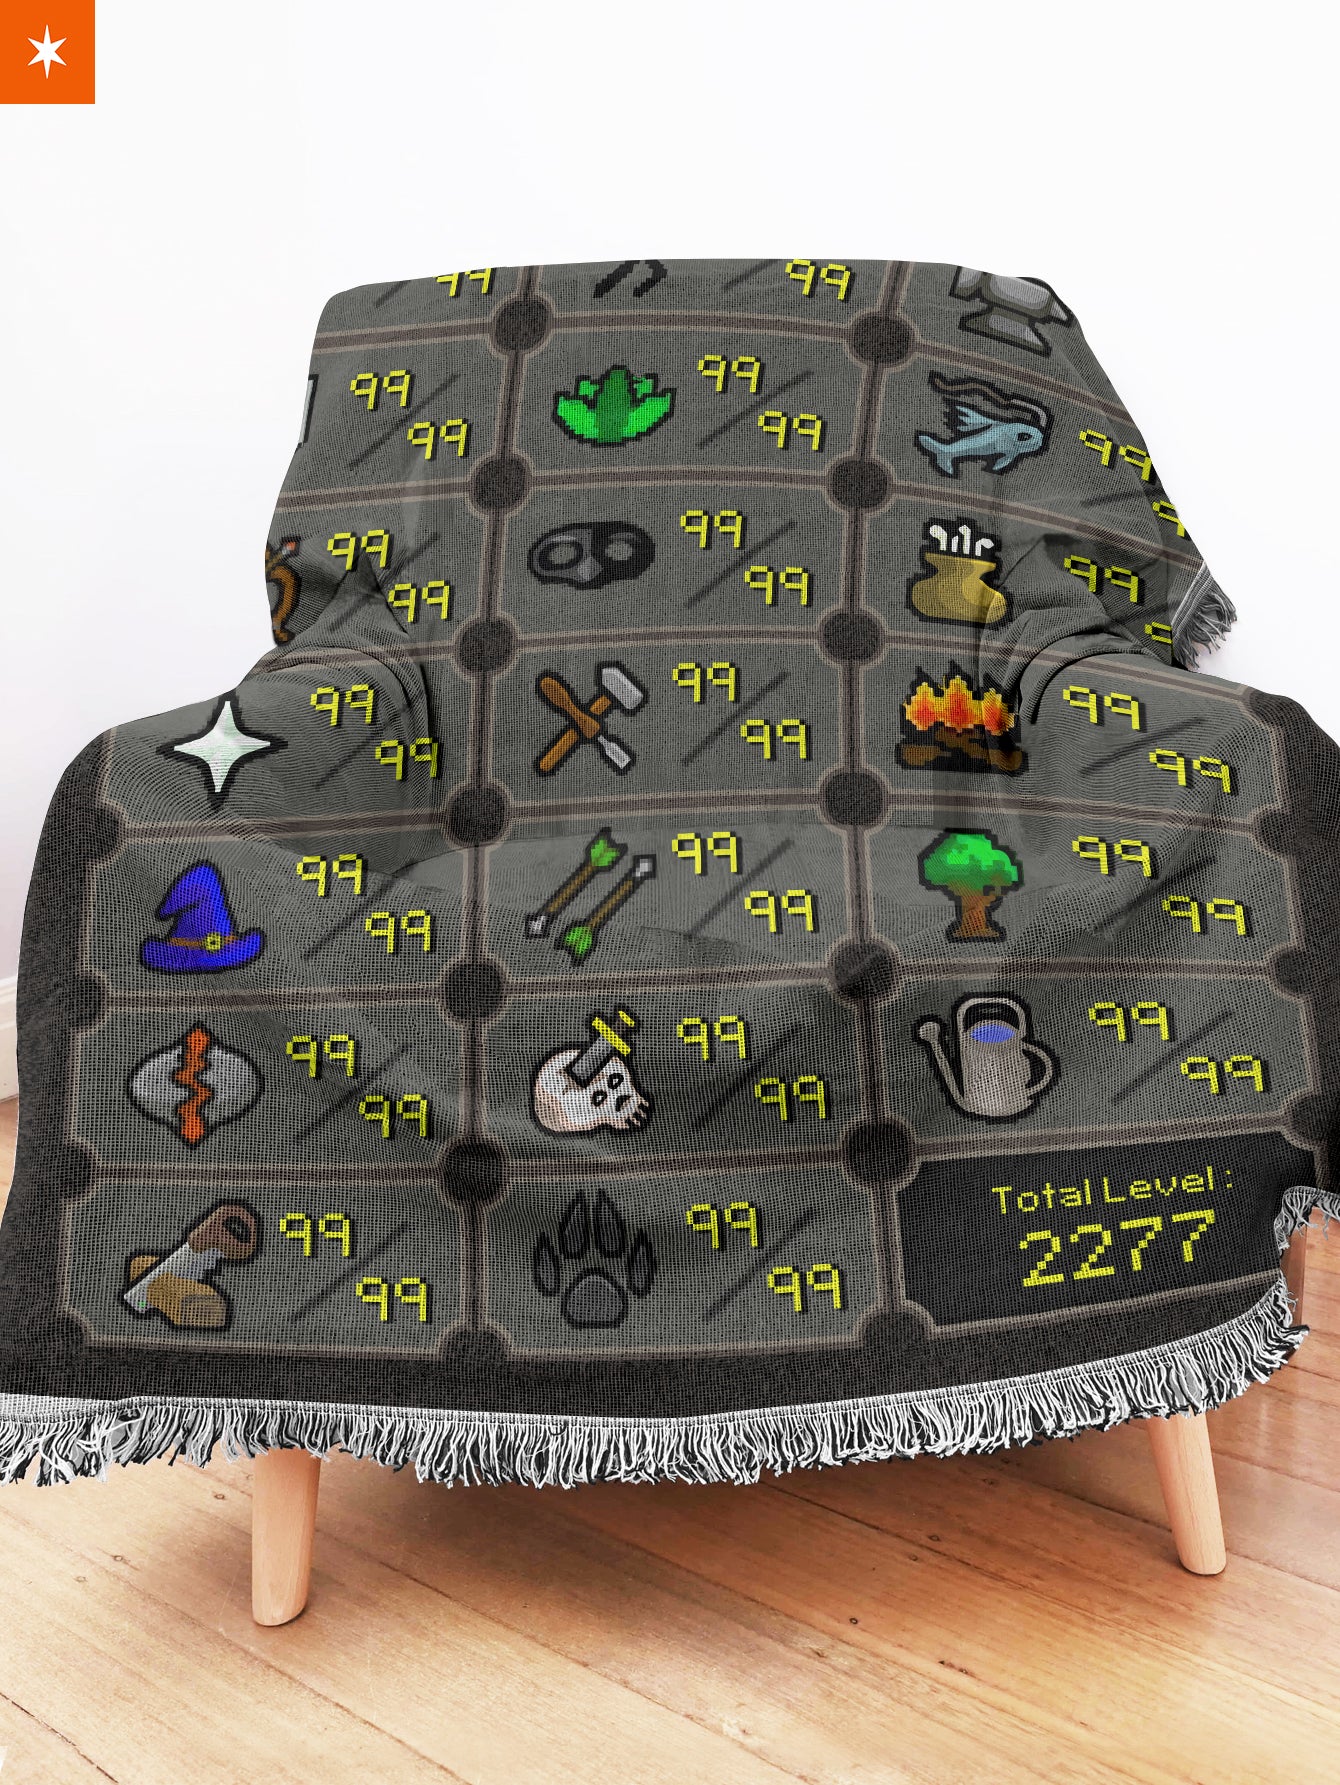 Runescape Max Stats Woven Tapestry